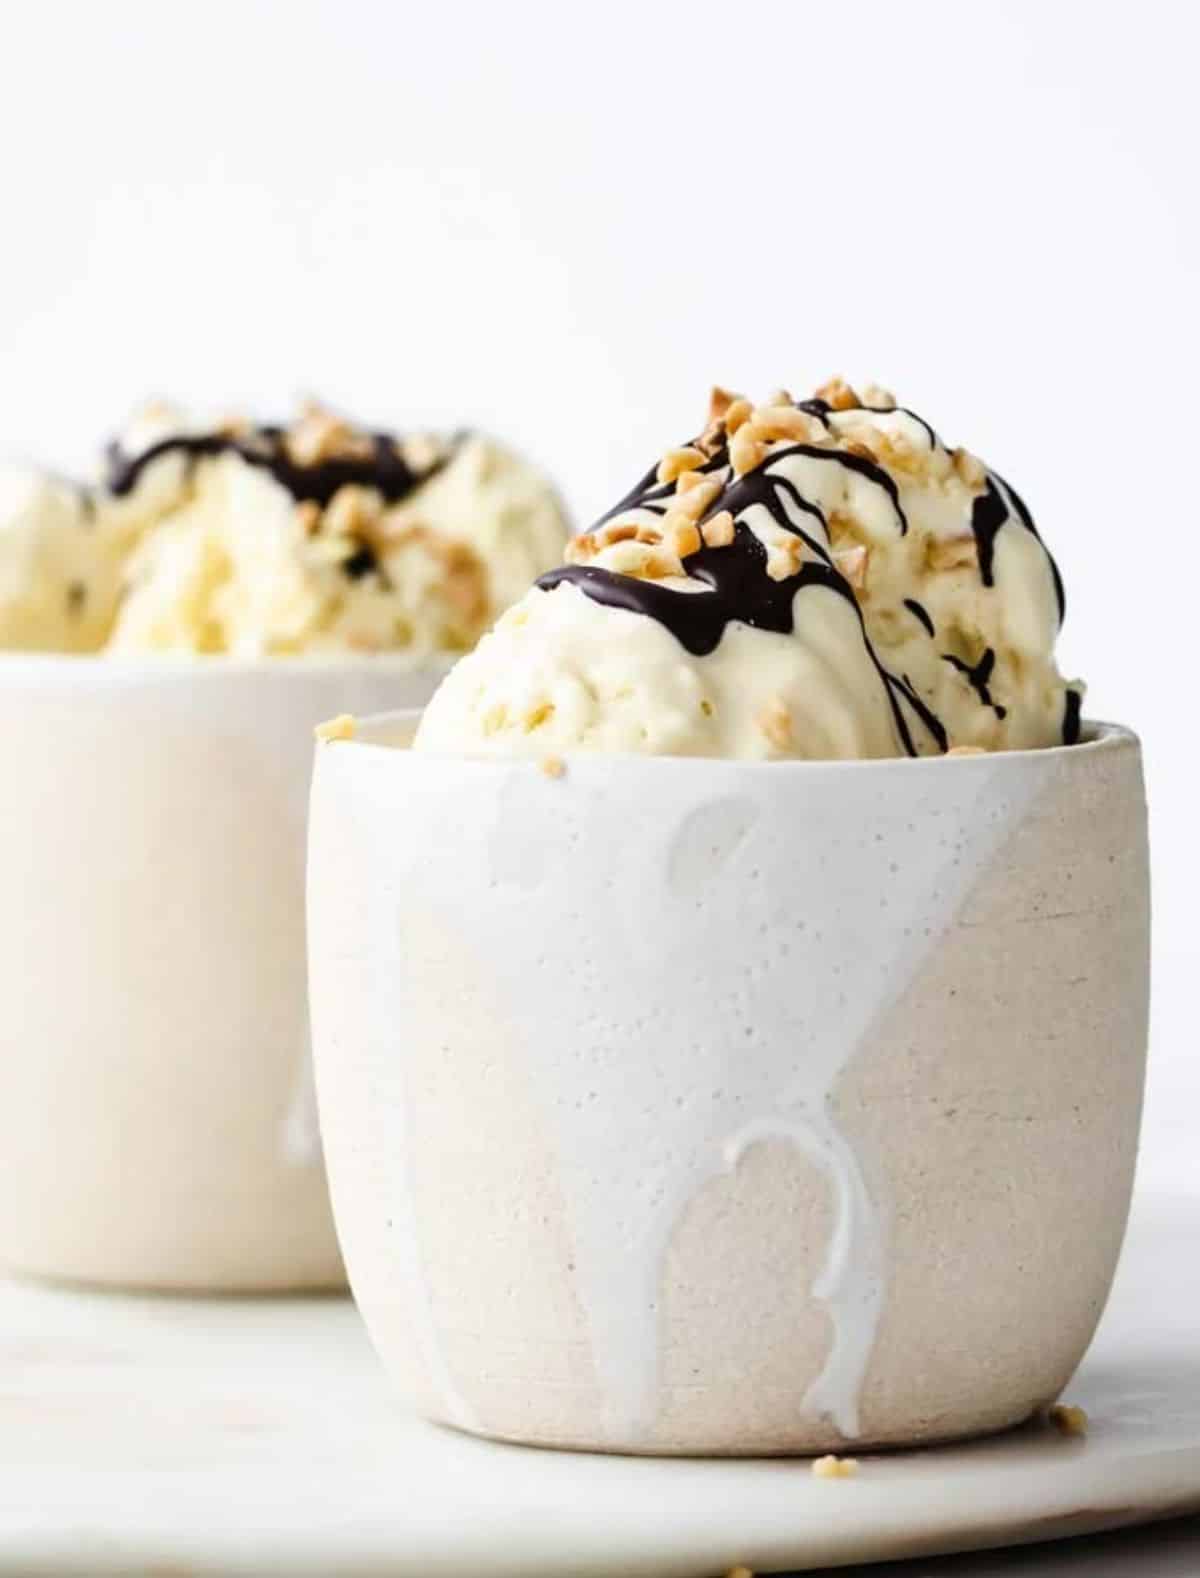 Low-Carb Sugar-Free Ice Cream Recipe in two small bowls.